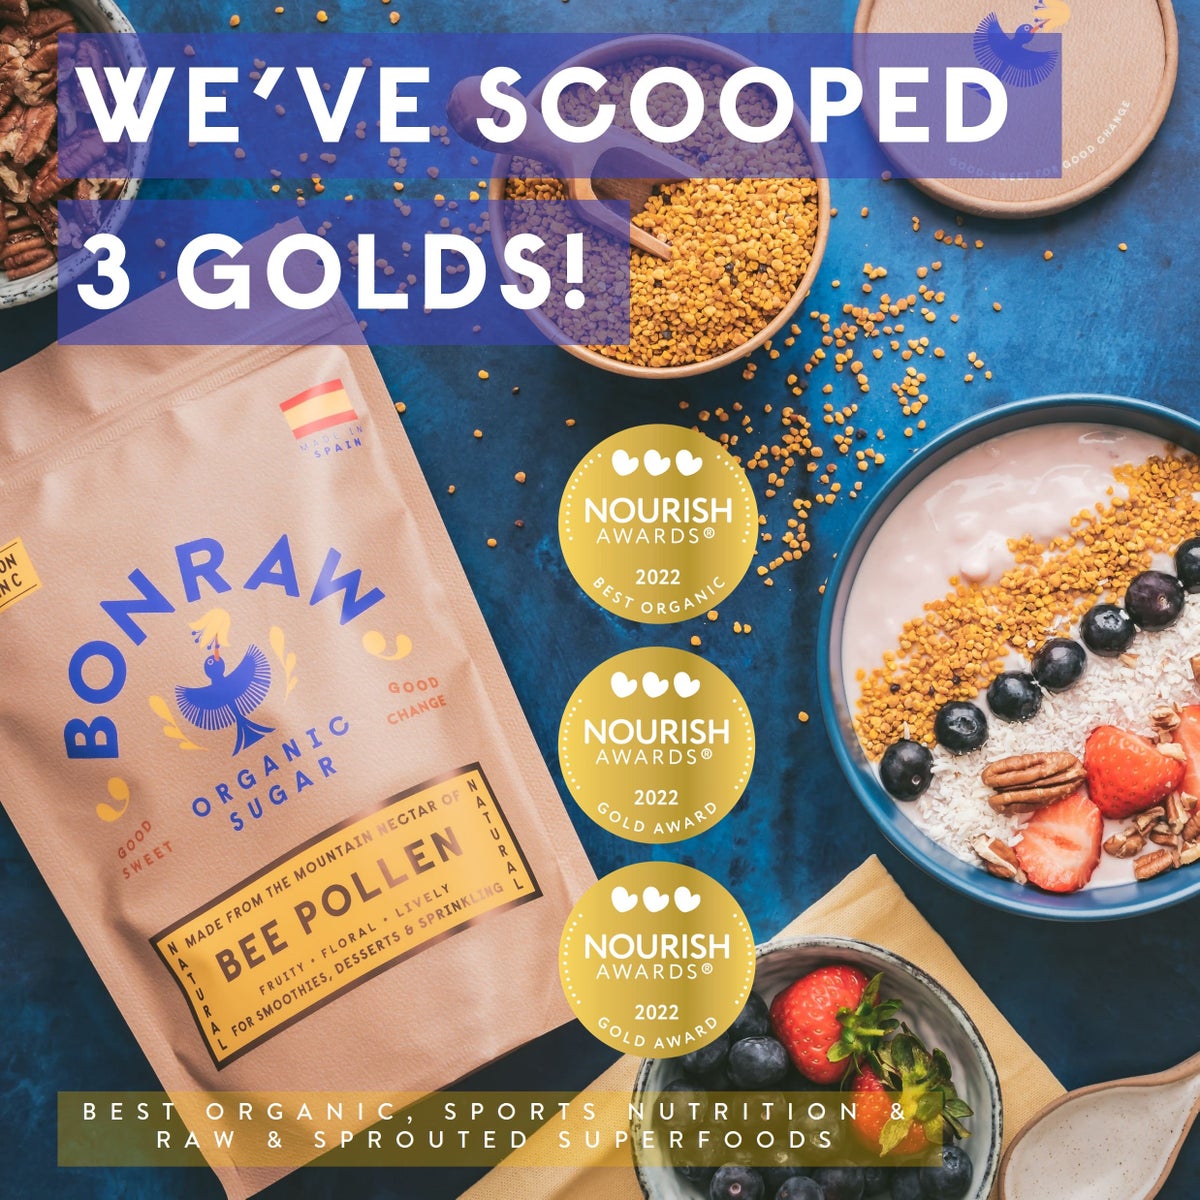 We've scooped 3 golds! Nourish Awards 2022, Gold Award. Best Organic, Sports Nutrition & Raw and Sprouted Superfoods.!